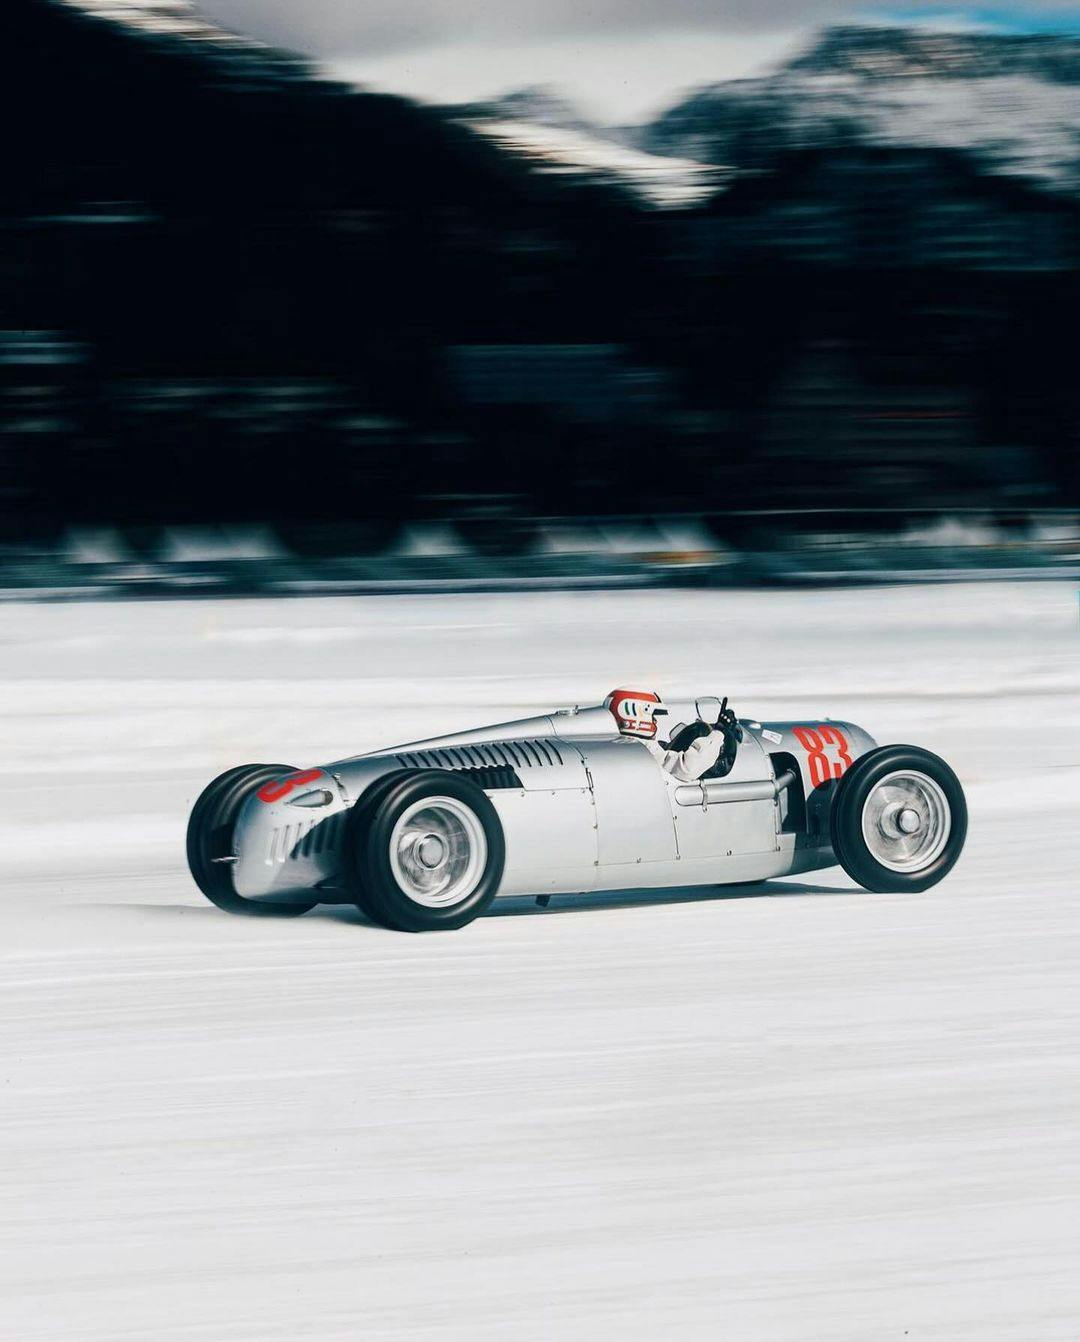 A vintage Car driving on Ice at the Ice Race in St. Moritz